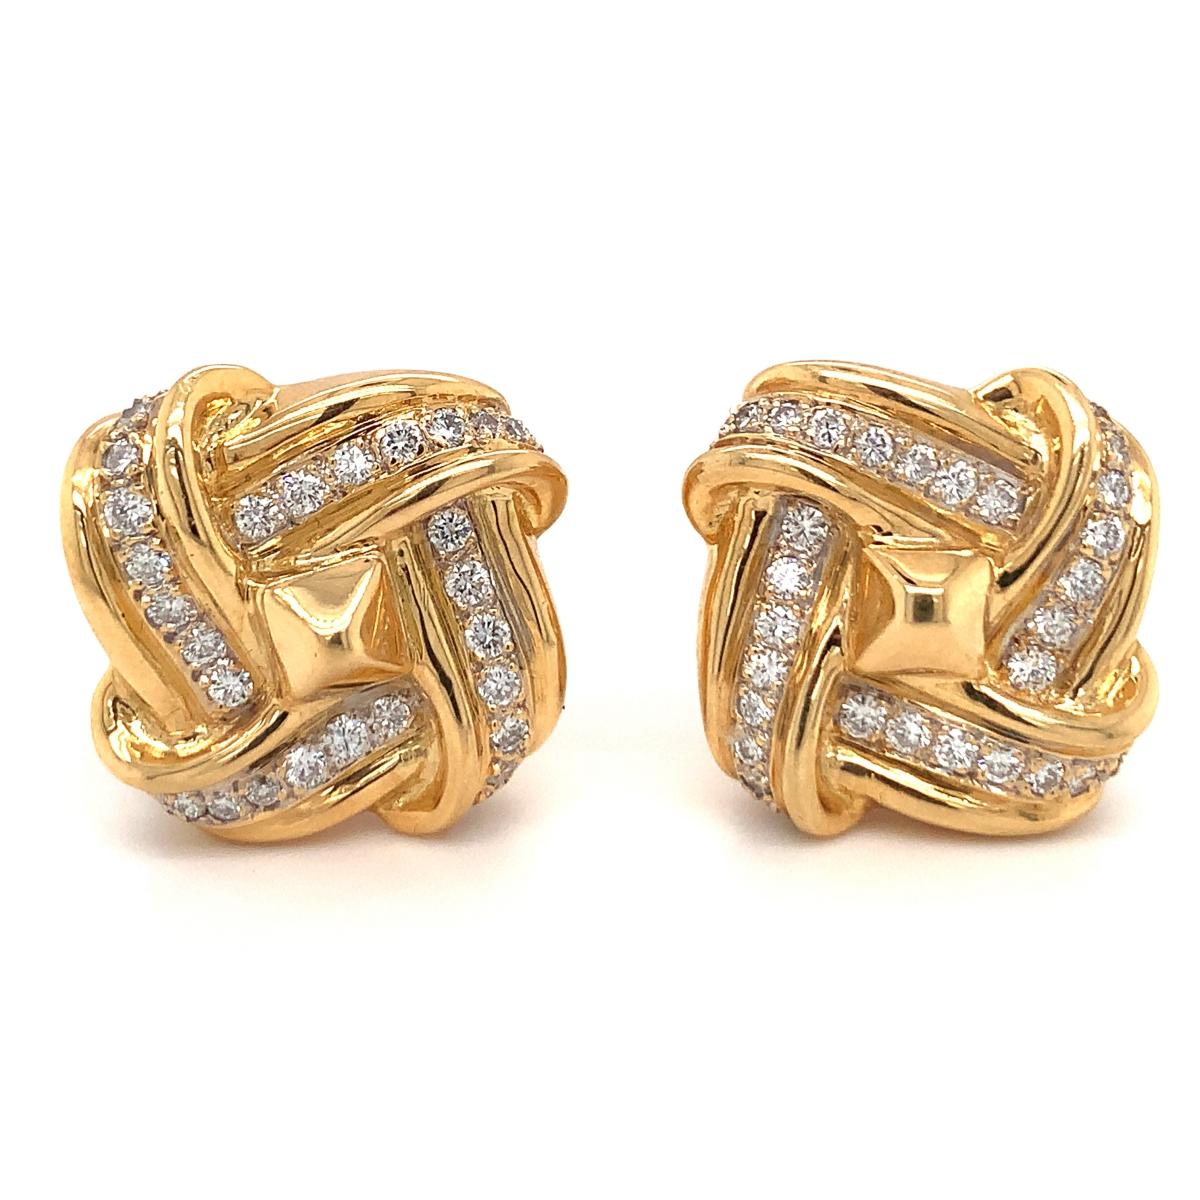 Brilliant Cut Diamond 18k Yellow Gold Knot Earclips, circa 1960s For Sale